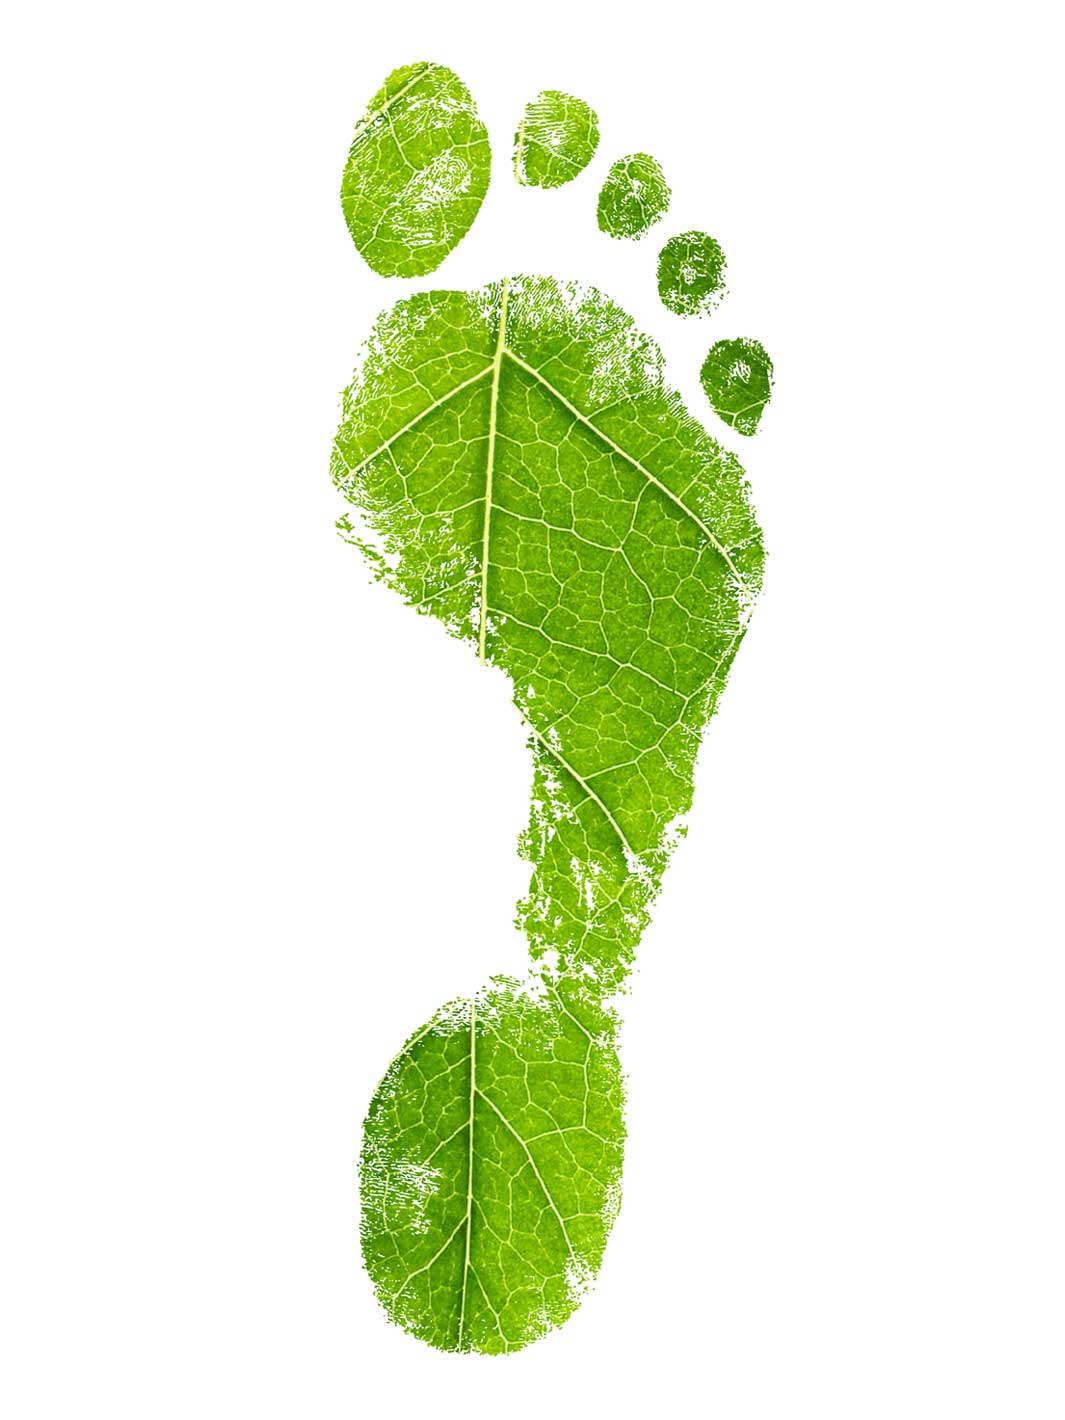 A footprint with a leaf texture.